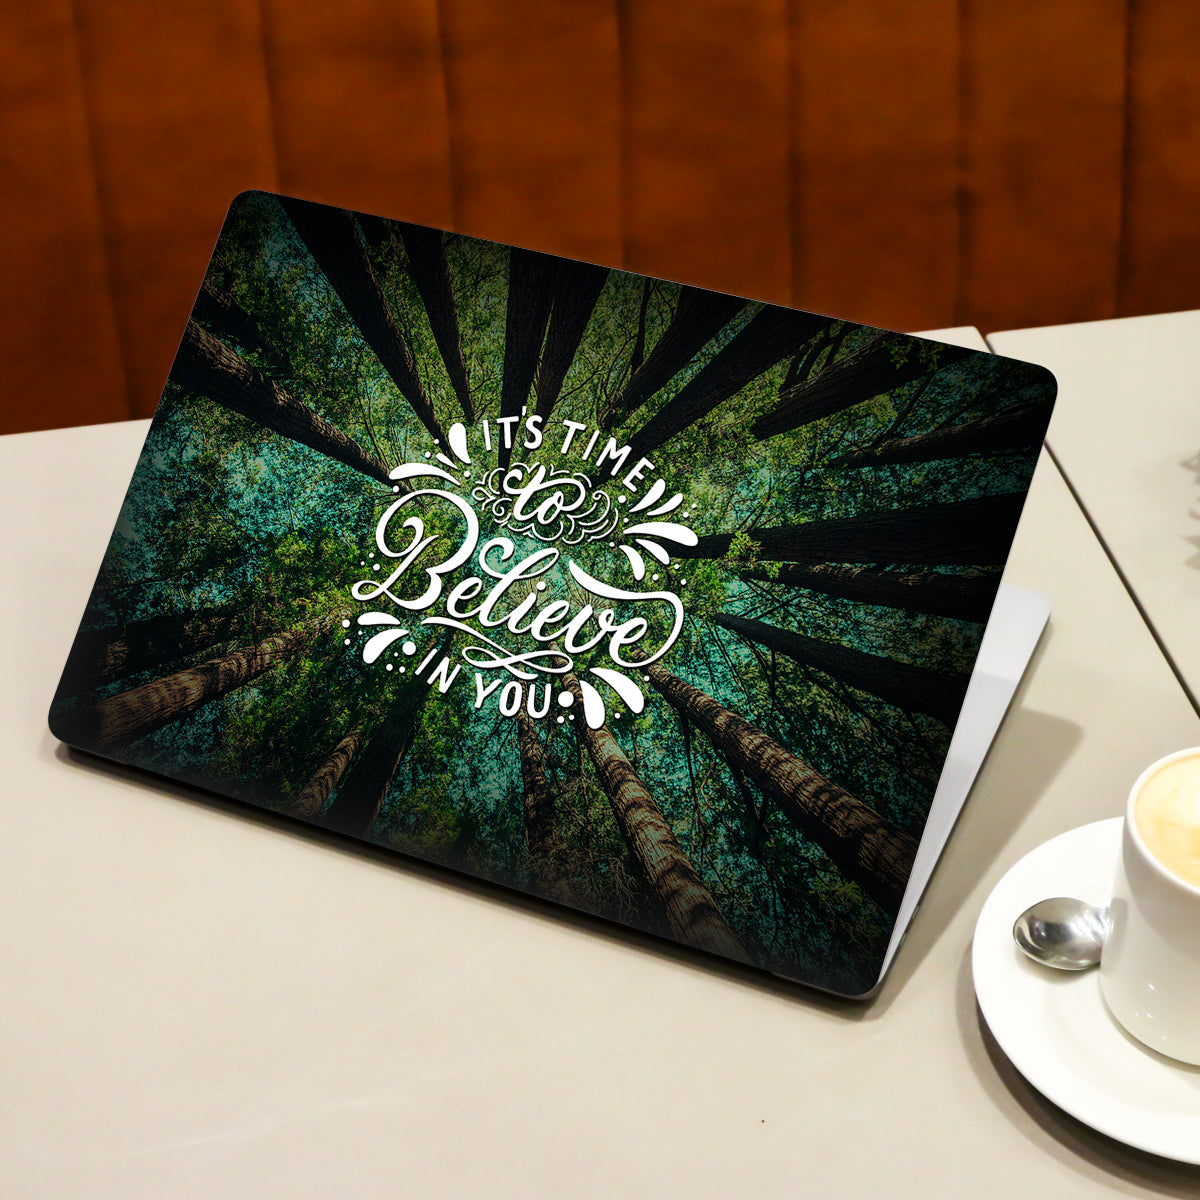 Its time to believe in you Quote Laptop Skin